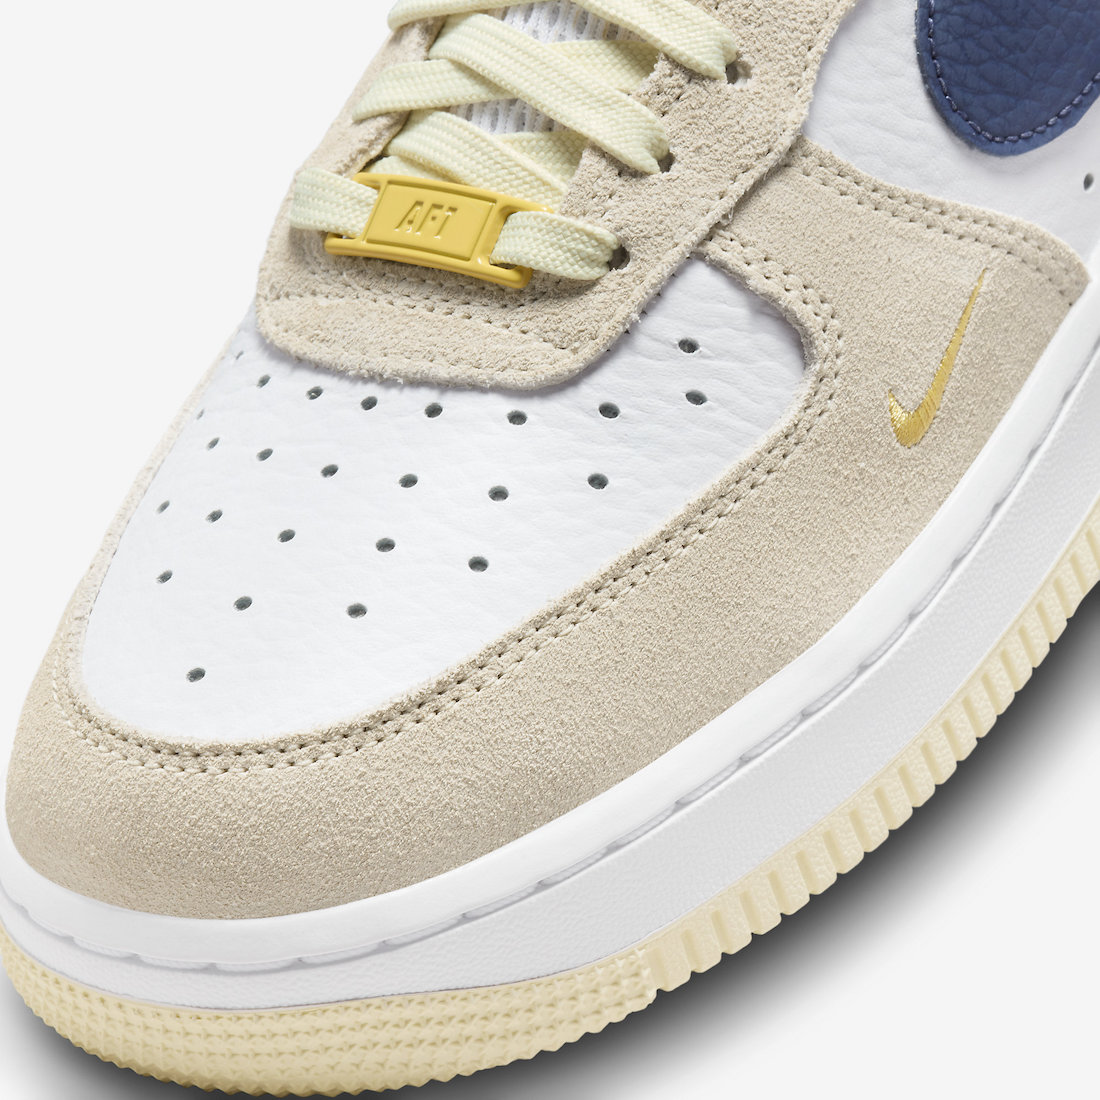 Nike Air Force 1 Low White Navy Gold FV6332-100 | SBD